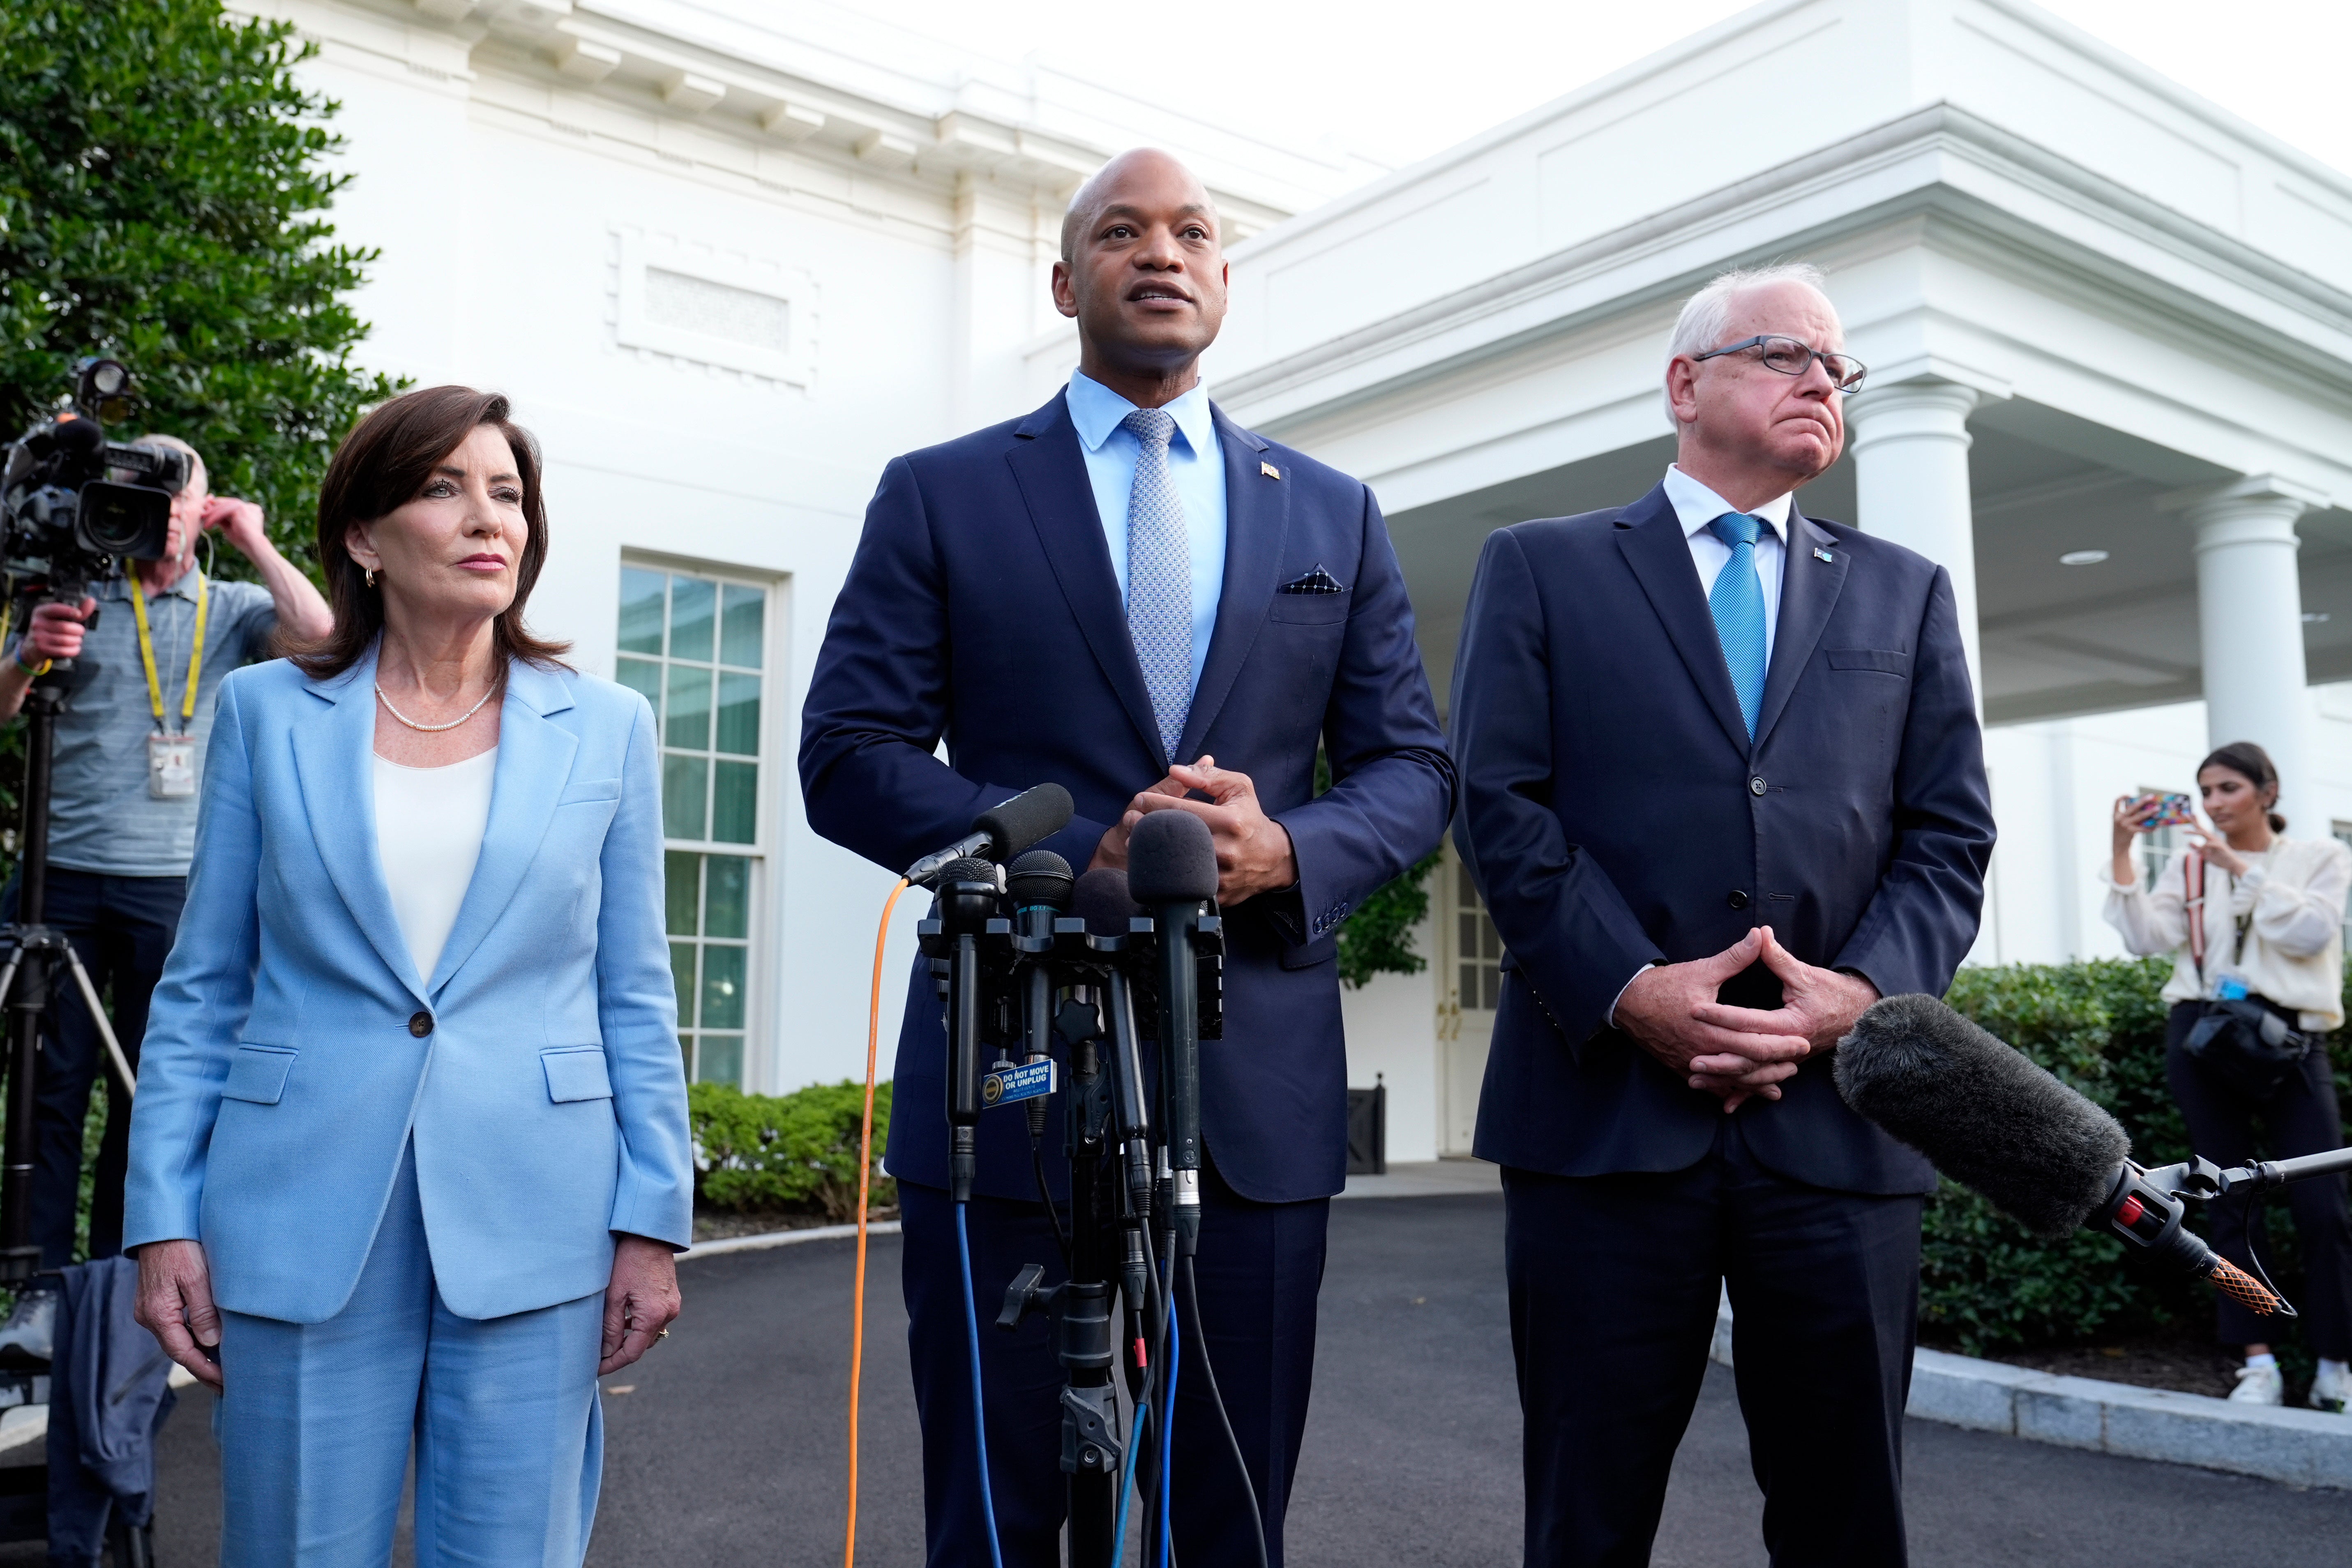 Maryland Gov. Wes Moore (center), standing with New York Gov. Kathy Hochul (left) and Minnesota Gov. Tim Walz (right), spoke with reporters after meeting with President Joe Biden. The three were some of the Democratic governors who spoke to the president and pledged their support